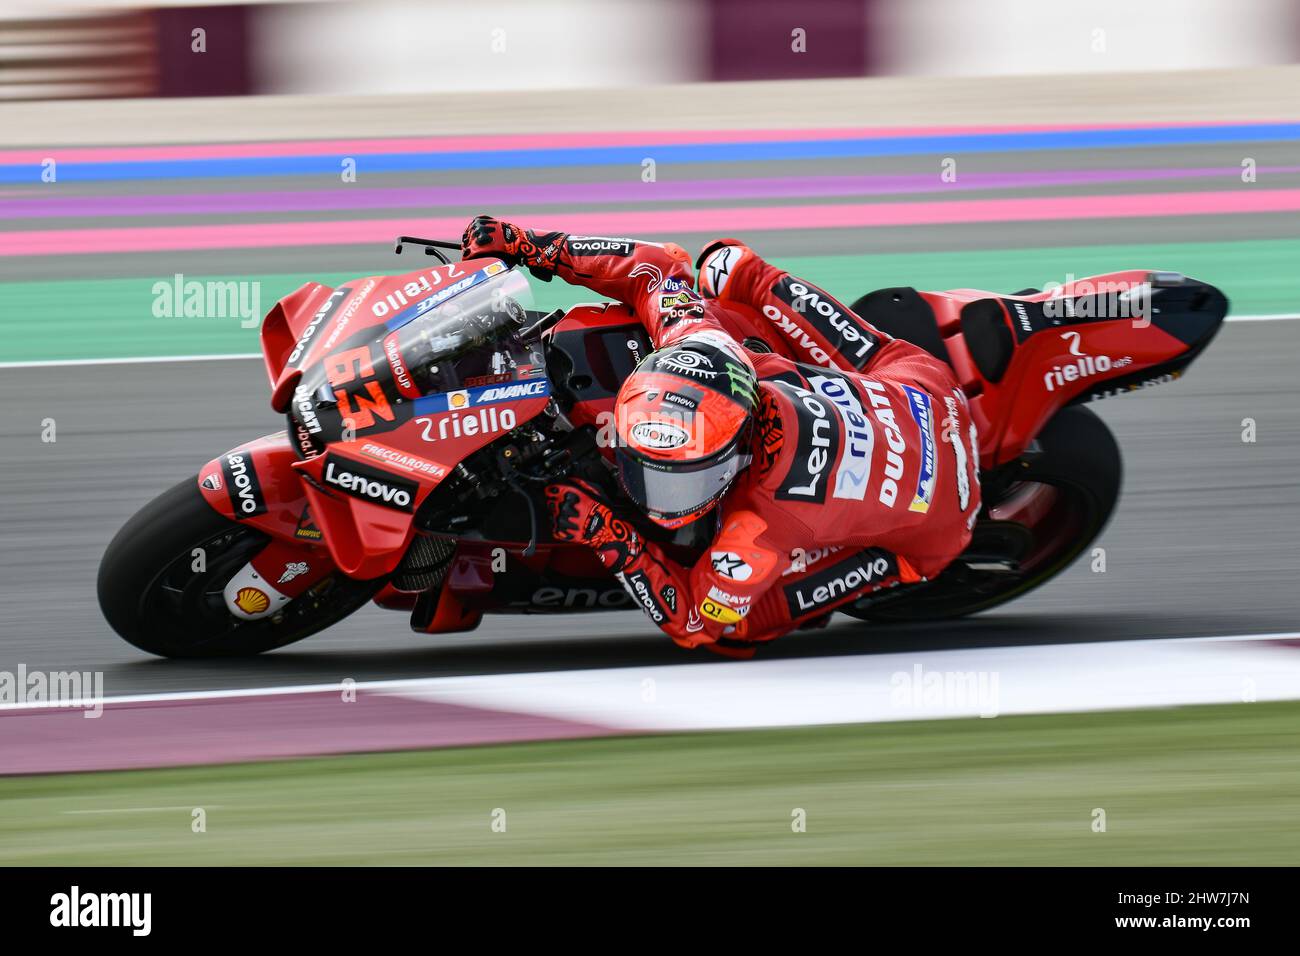 Francesco Bagnaia of Ducati Lenovo Team in action during Free Practice 1 at the Grand Prix of Qatar, Losail International Circuit on March 4th 2022 in Doha, Qatar